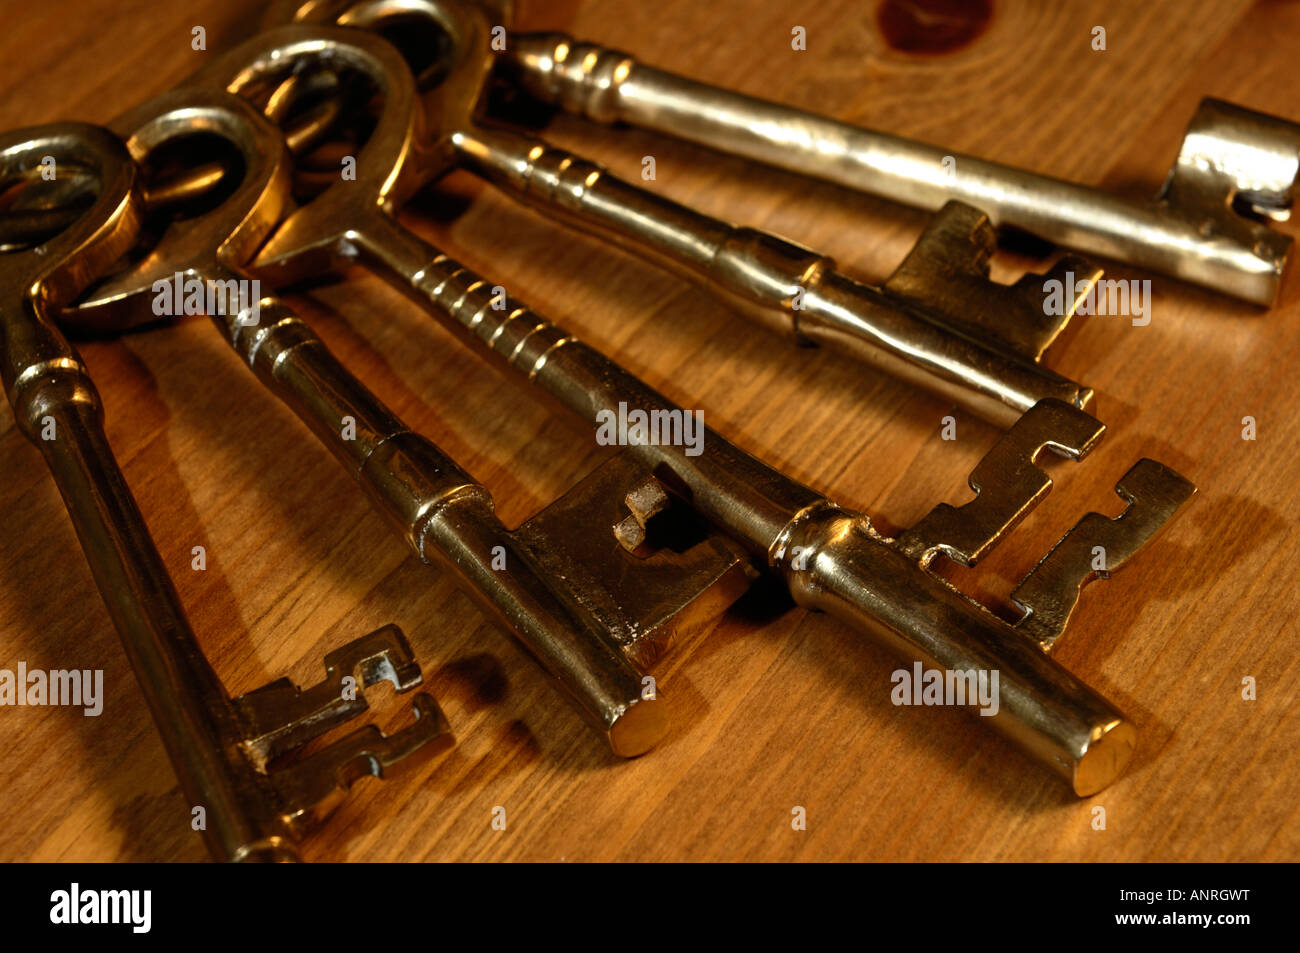 Bunch of old brass skeleton keys on a wooden table Stock Photo